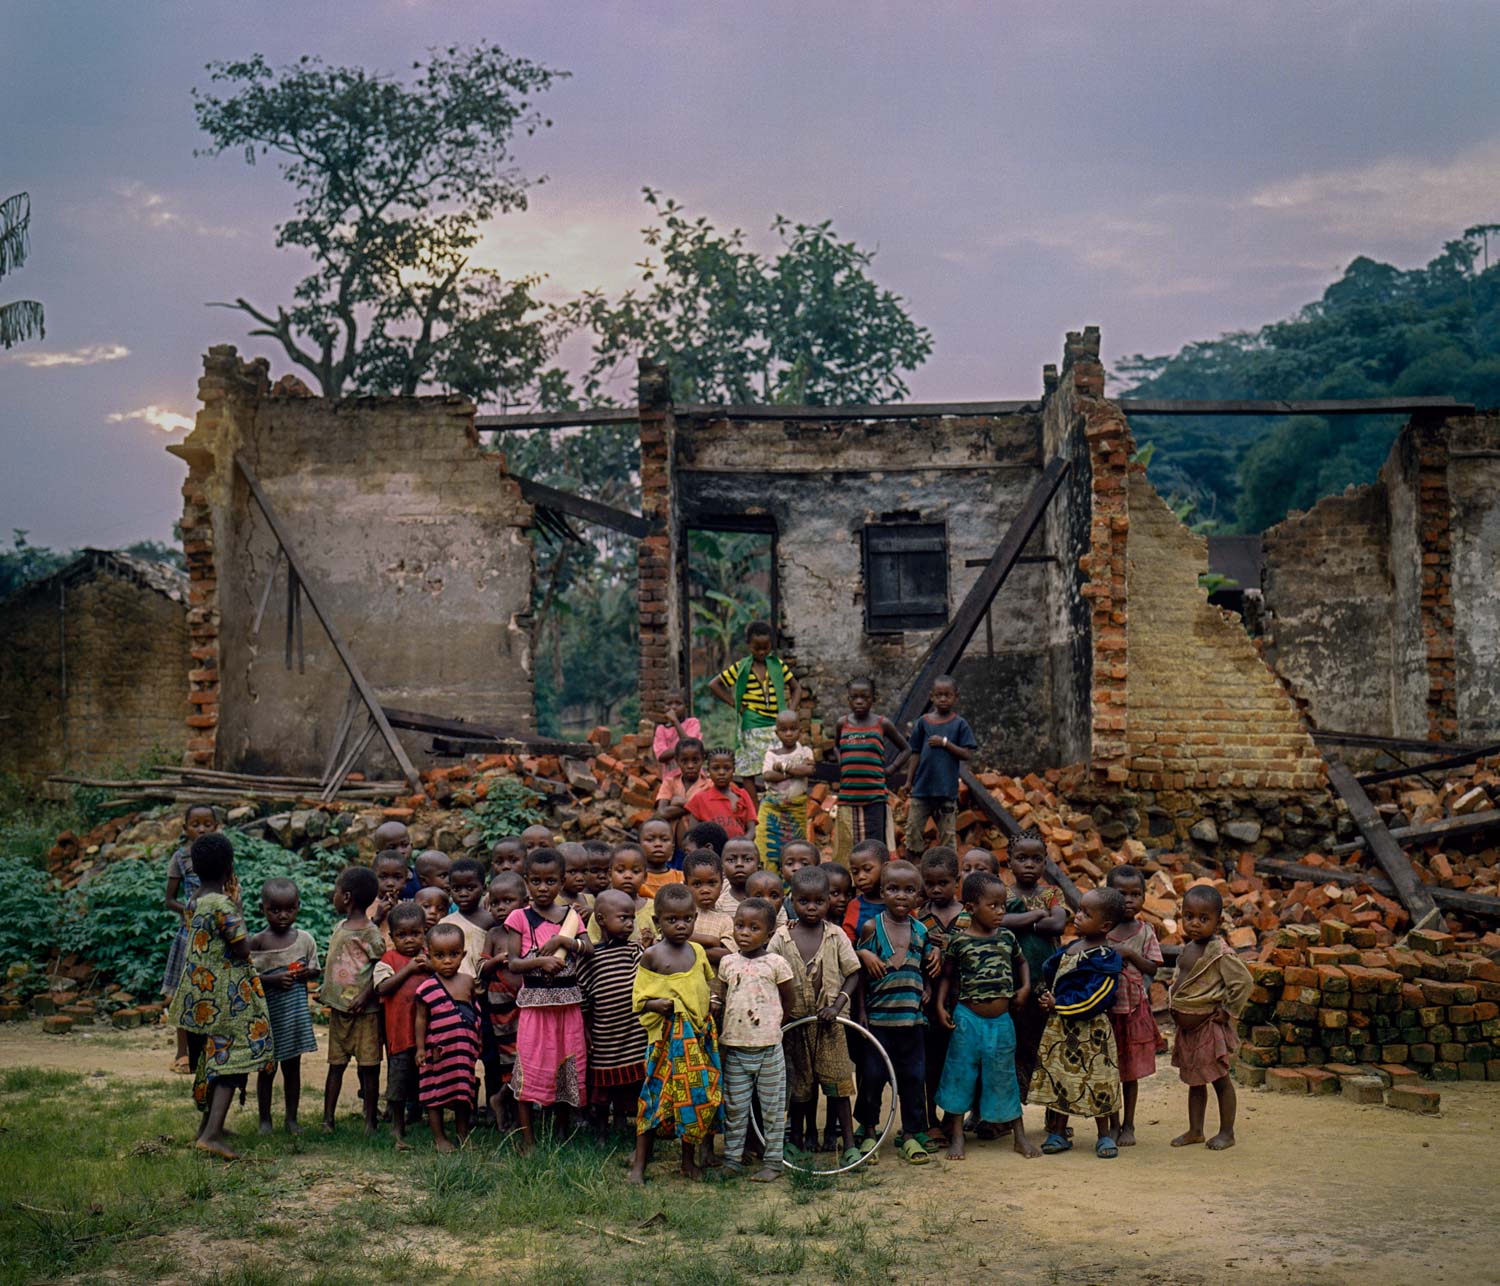  Decaying Belgian colonial era structures speak to the area’s history of mining, and to Congo’s struggles with outsiders who vied for its riches. Lulingu was a central site for Belgian colonial mining operations until the 1960s. After independence, t